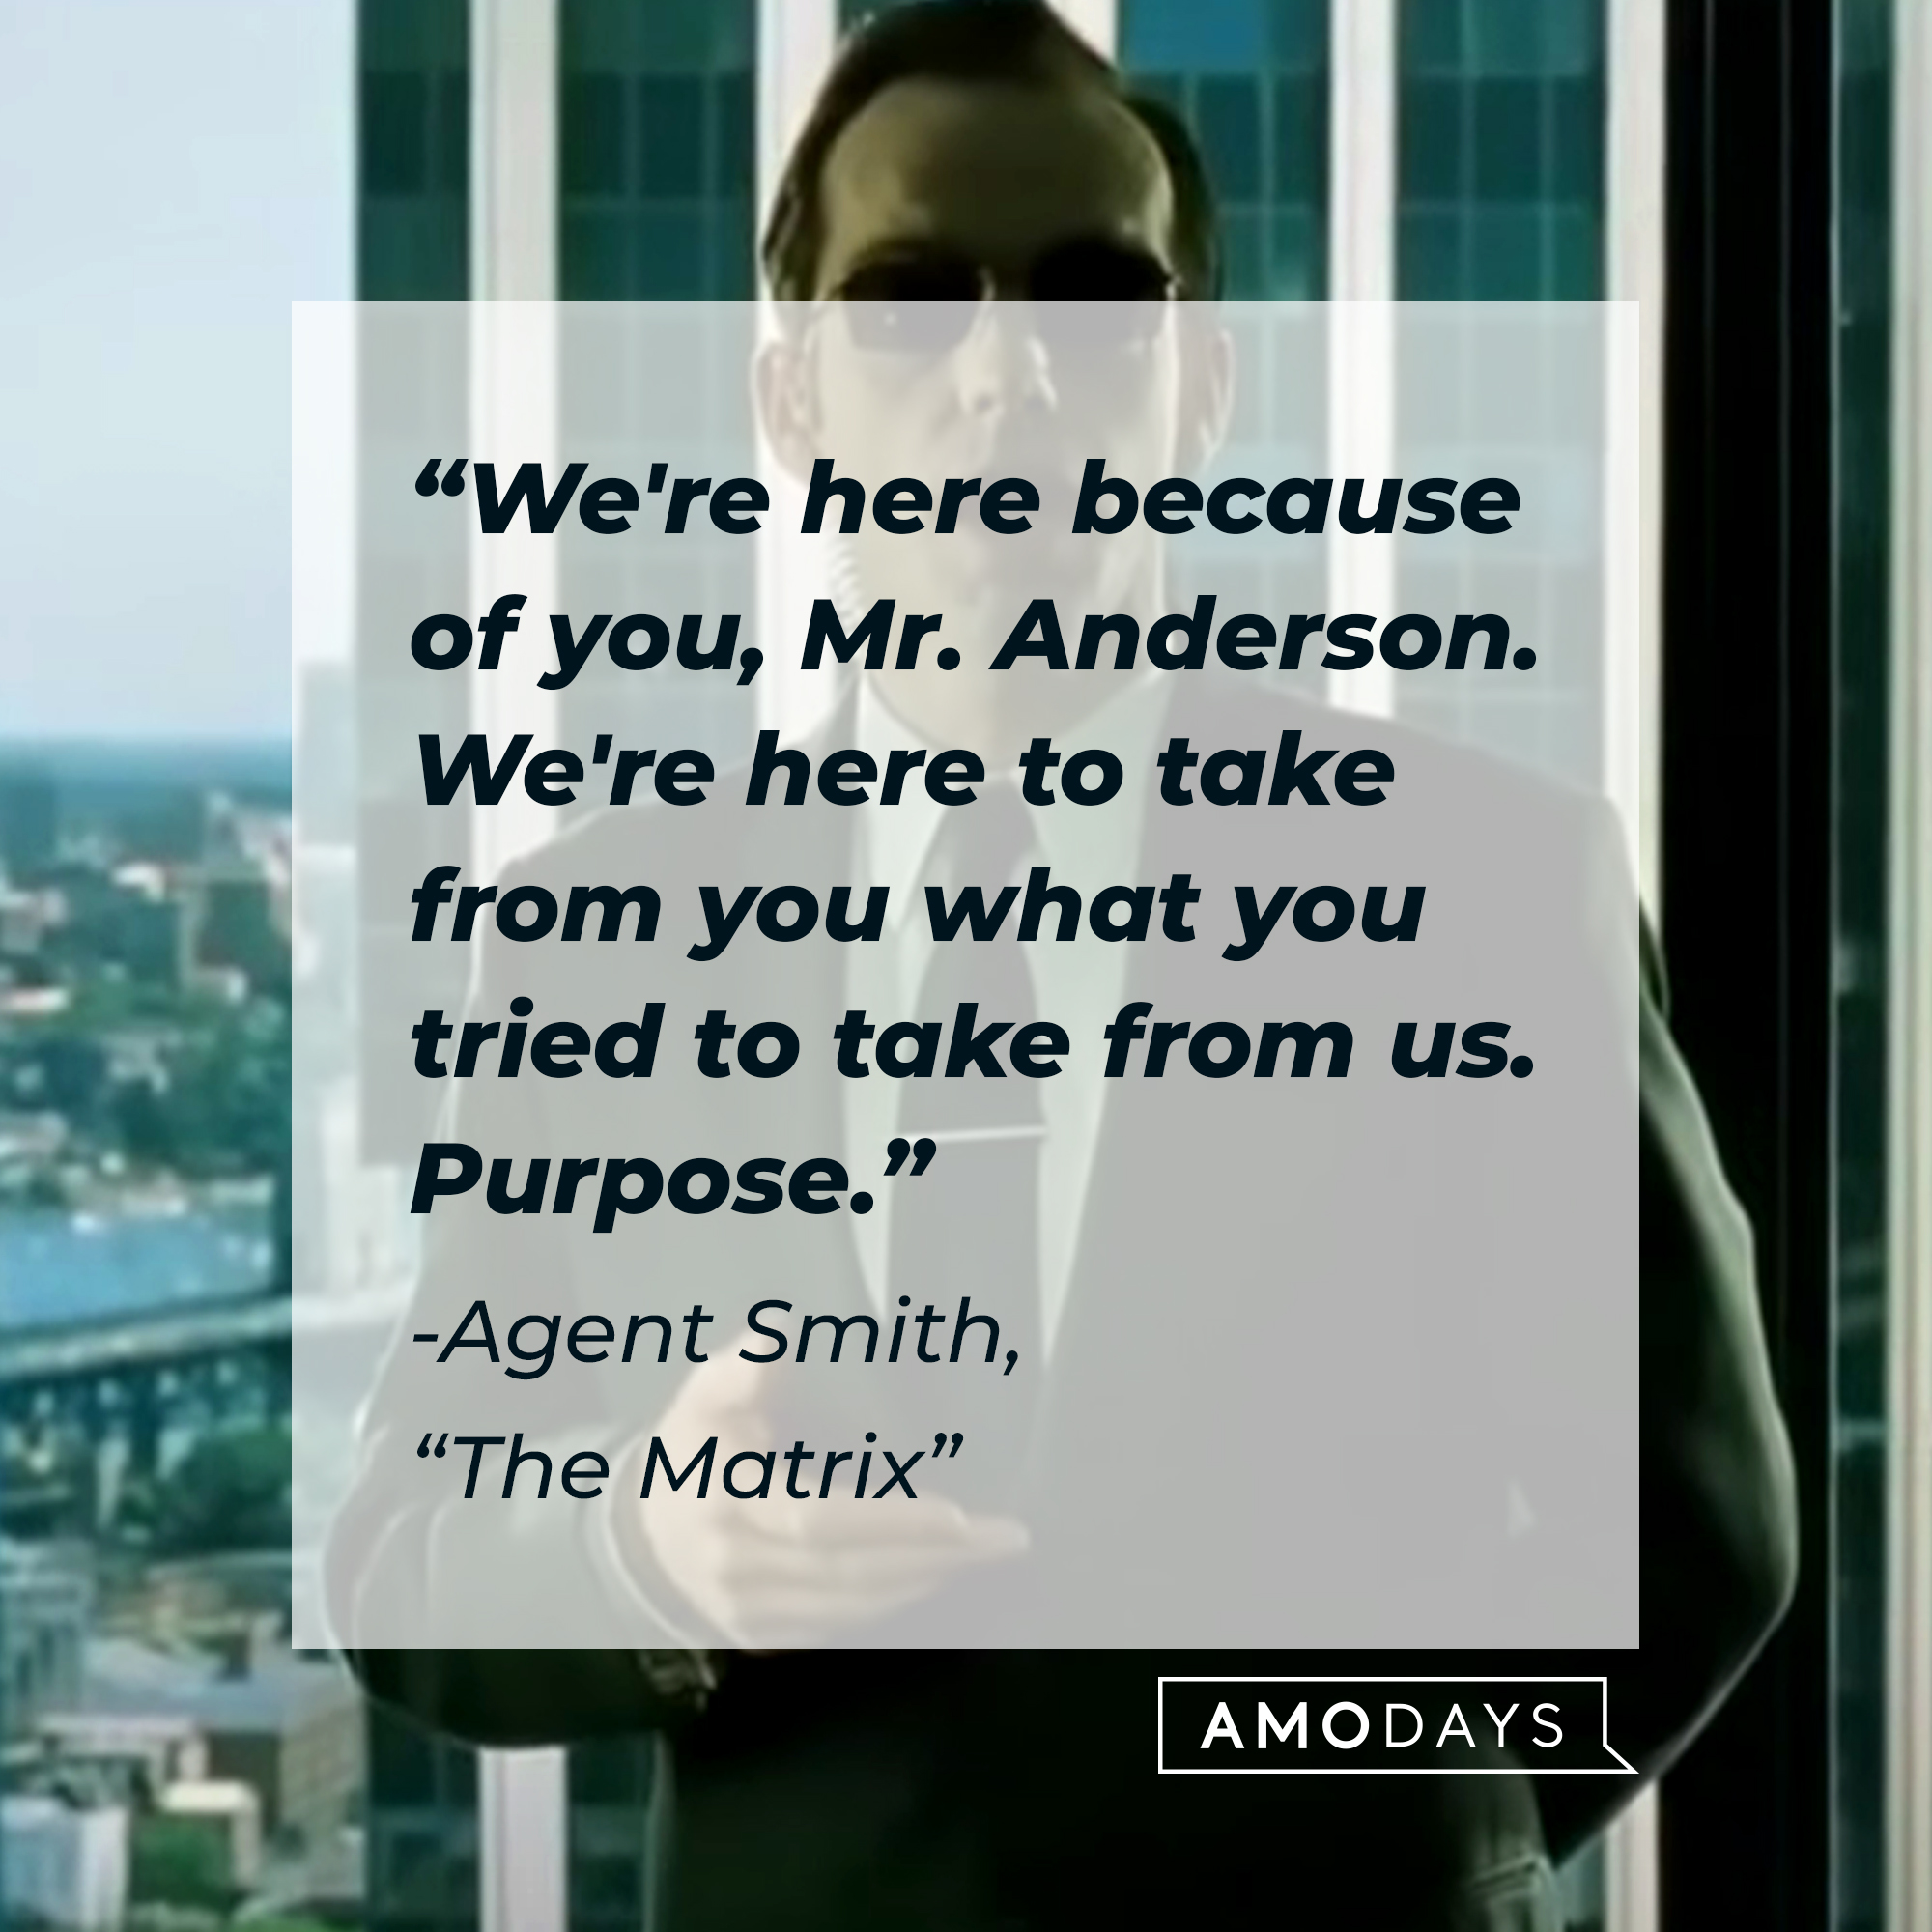 Agent Smith with his quote: "We're here because of you, Mr. Anderson. We're here to take from you what you tried to take from us. Purpose." | Source: Facebook.com/TheMatrixMovie